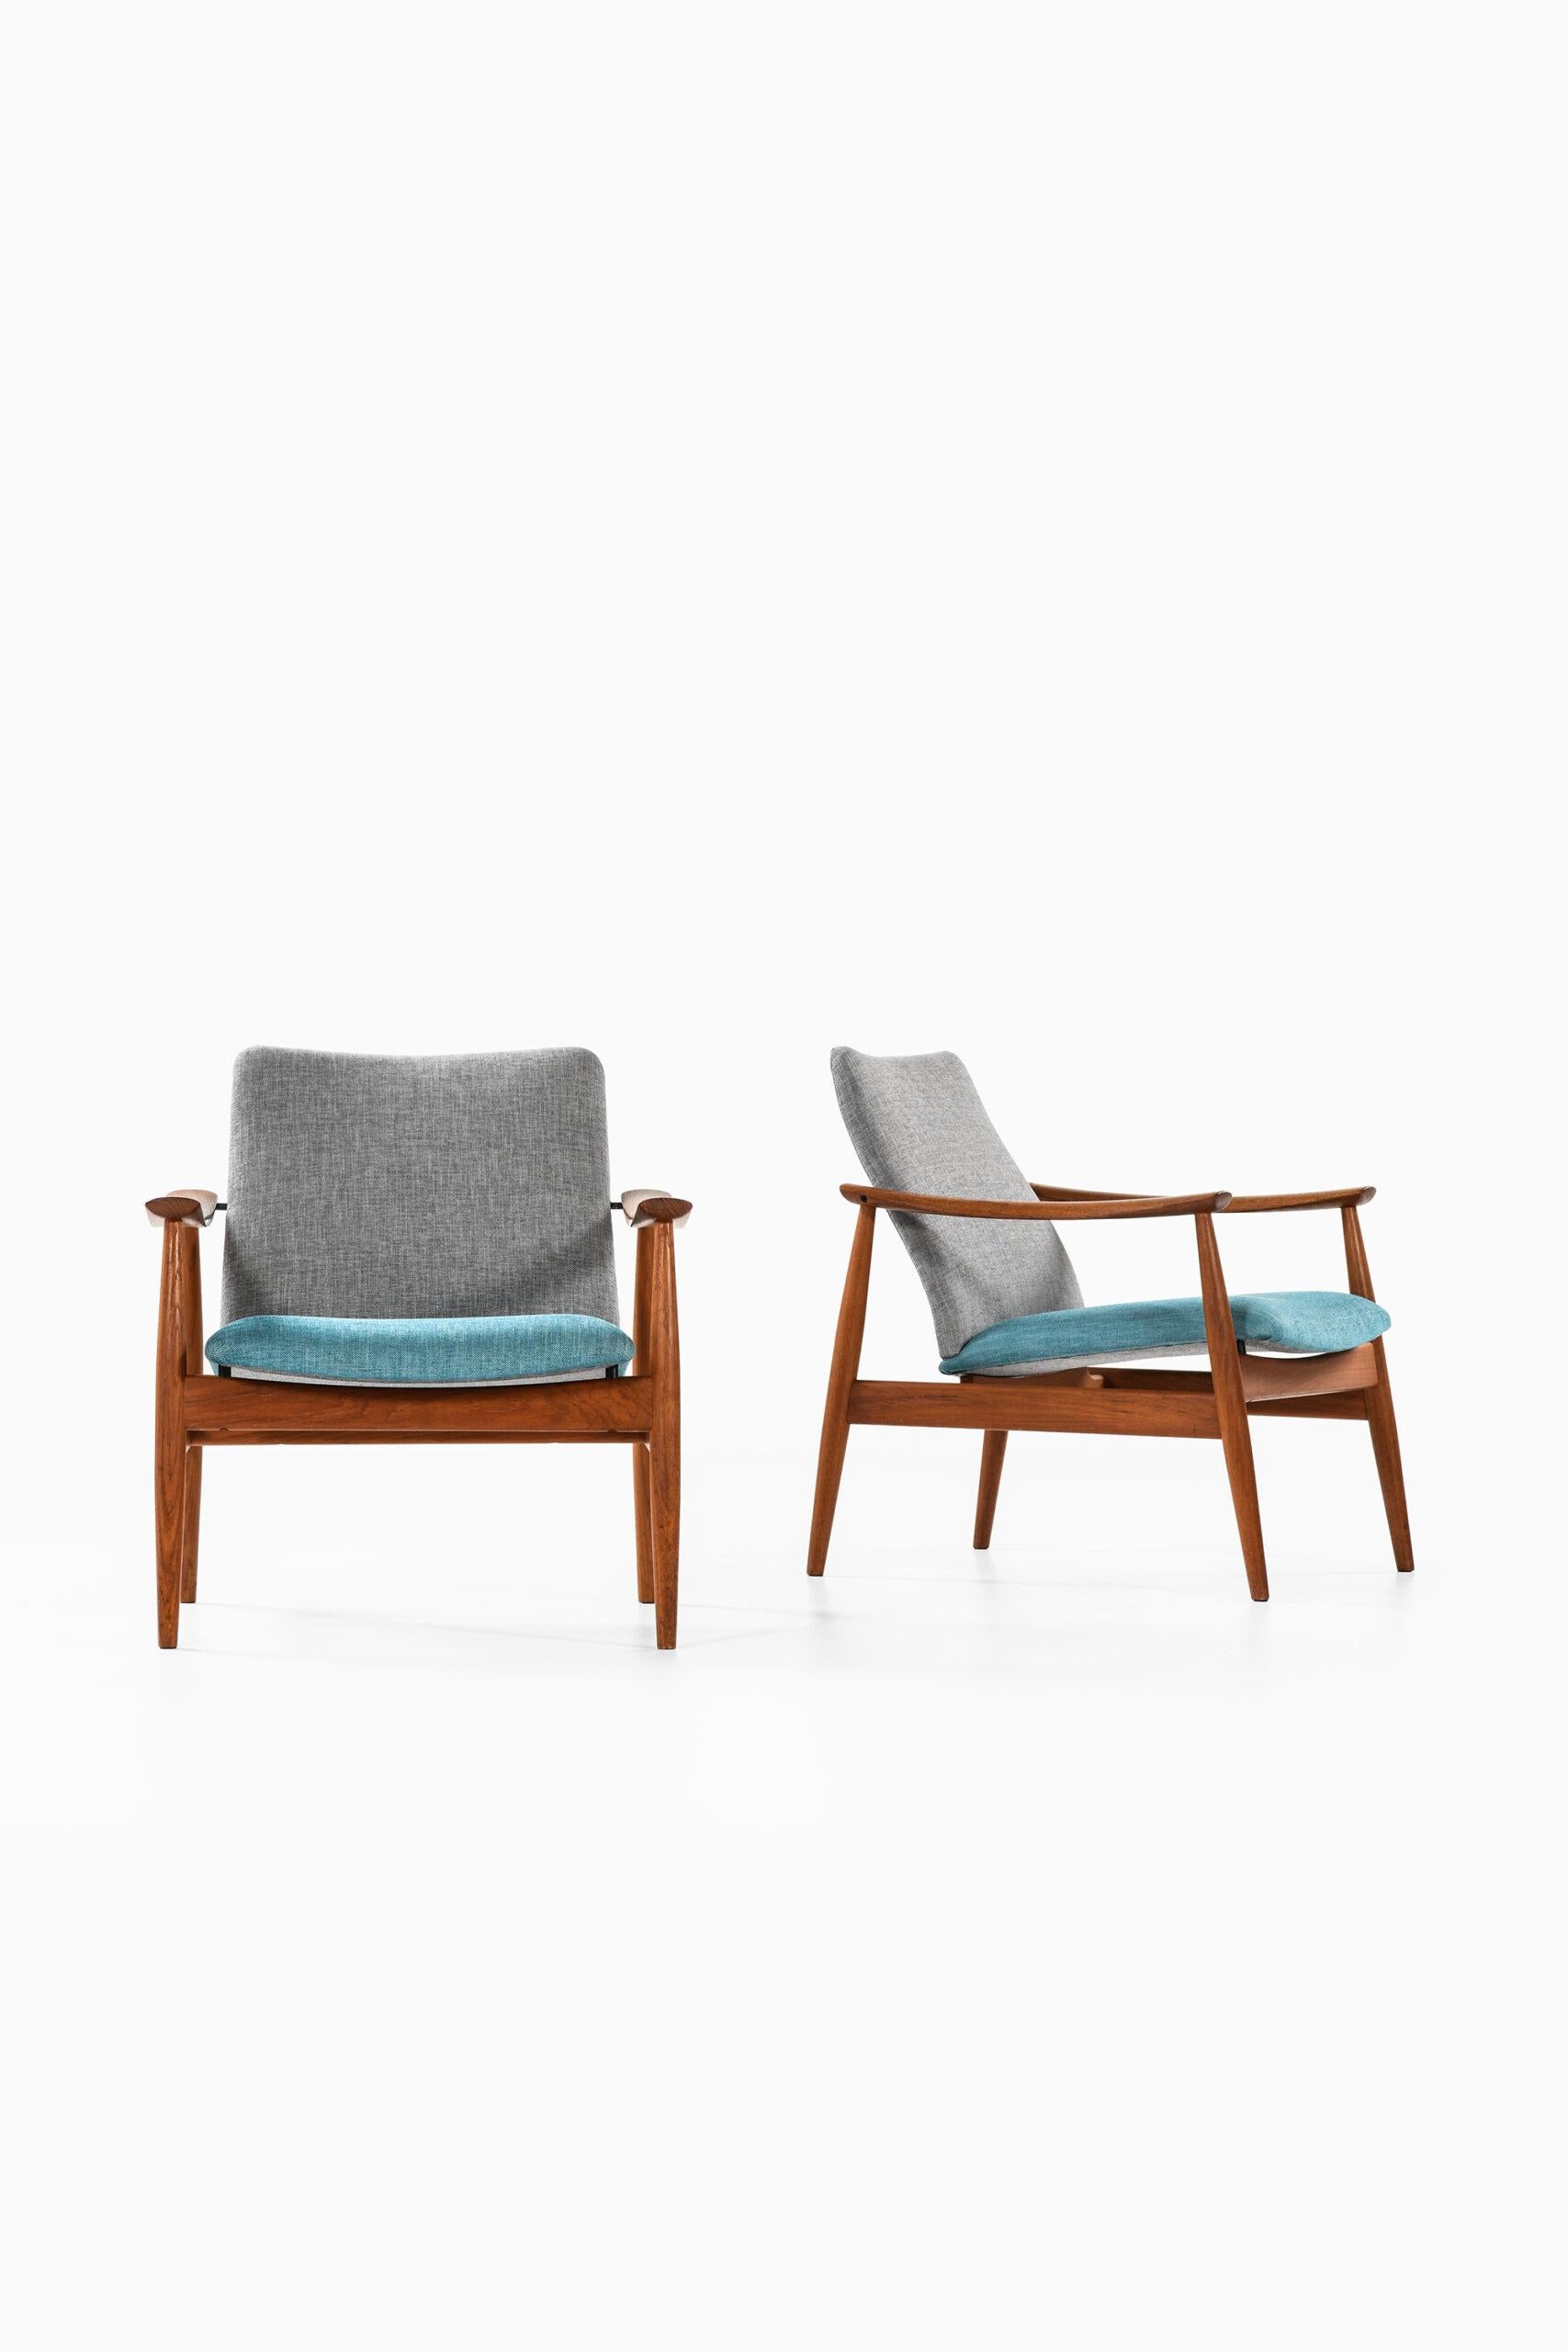 Rare easy chairs model 138 designed by Finn Juhl. Produced by France & Son in Denmark.